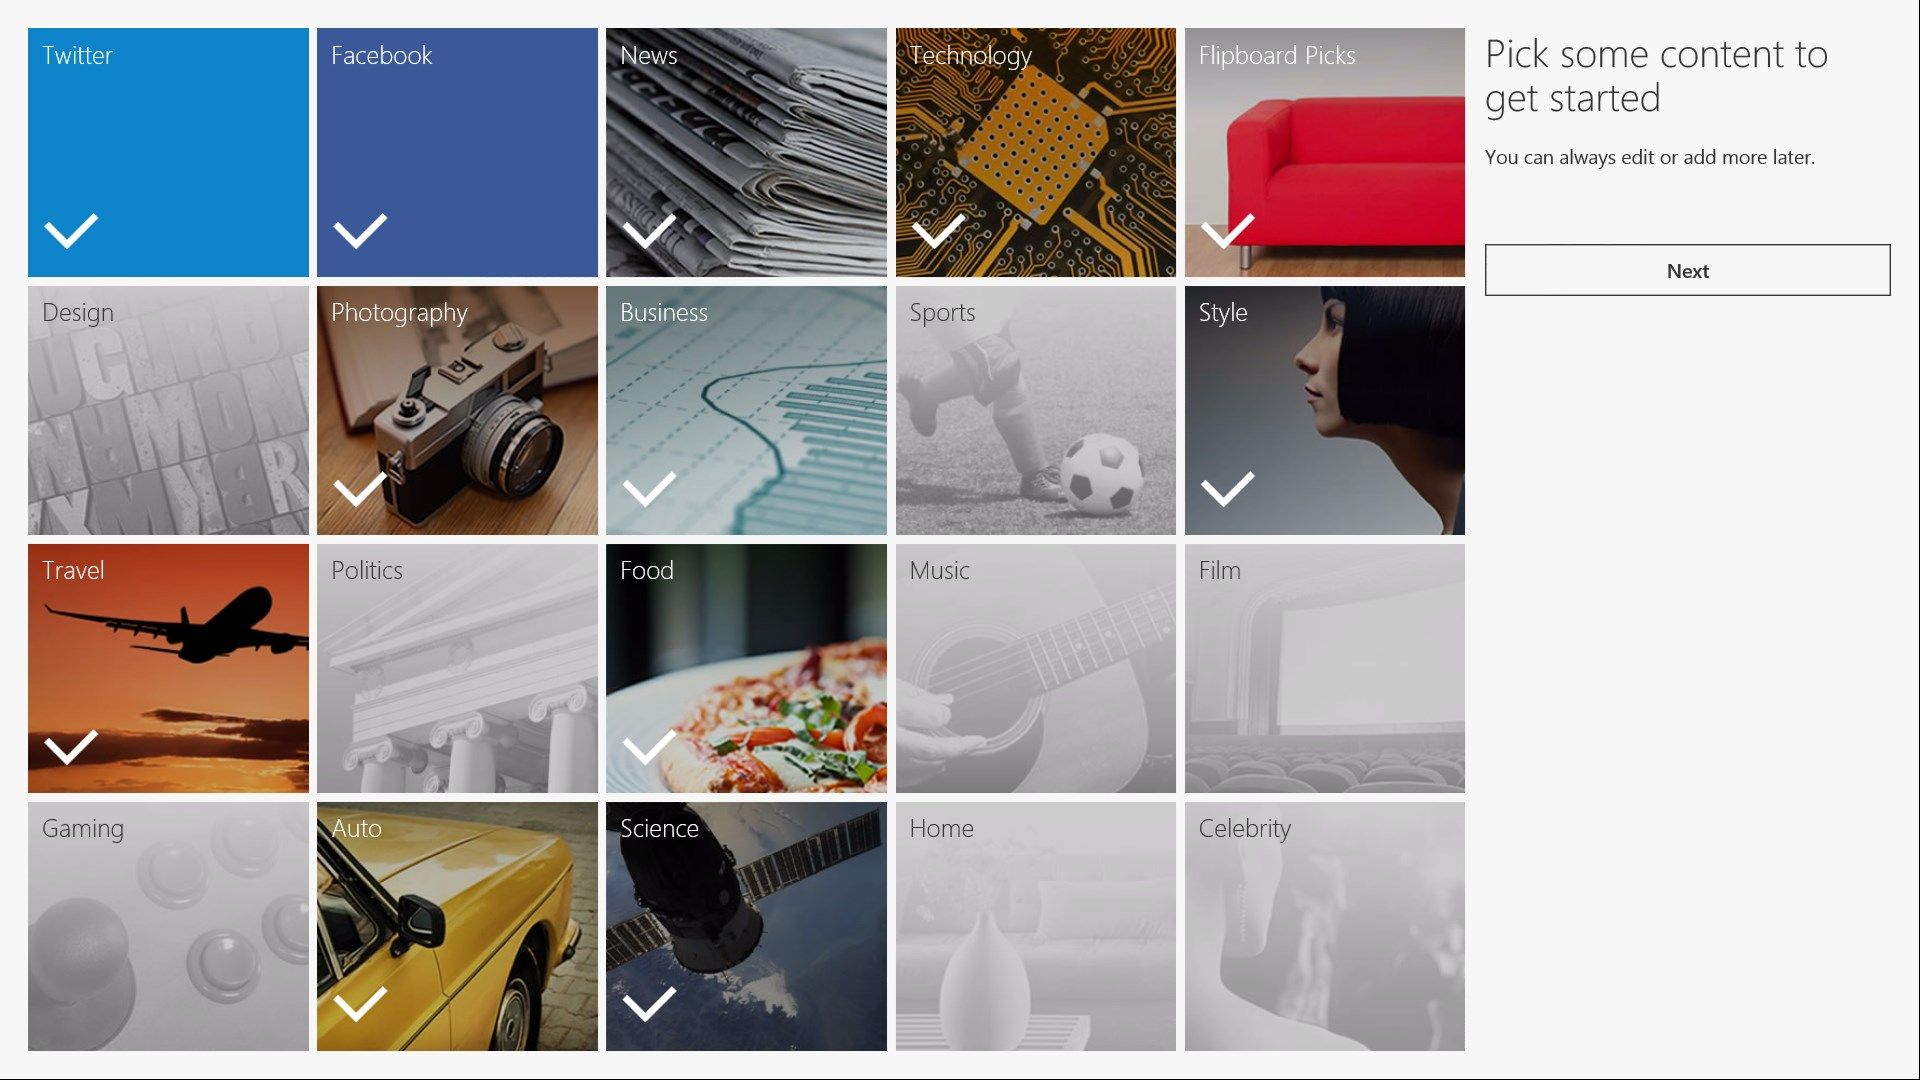 Select your favorite topics to build your Flipboard.